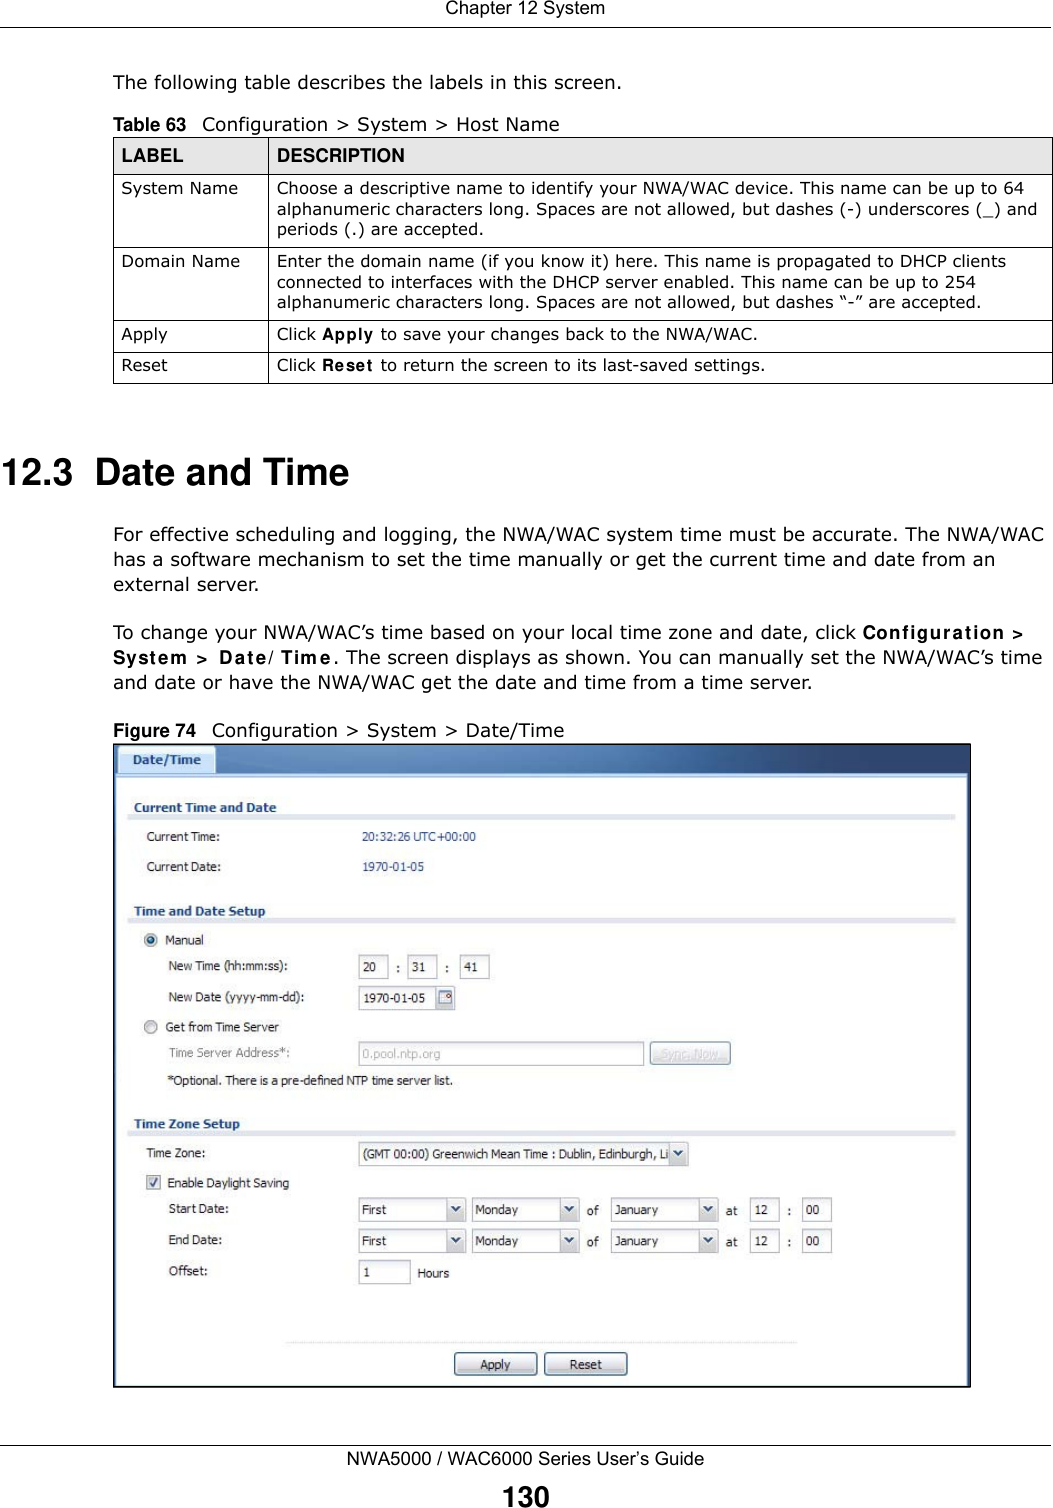 Chapter 12 SystemNWA5000 / WAC6000 Series User’s Guide130The following table describes the labels in this screen. 12.3  Date and Time For effective scheduling and logging, the NWA/WAC system time must be accurate. The NWA/WAC has a software mechanism to set the time manually or get the current time and date from an external server.To change your NWA/WAC’s time based on your local time zone and date, click Configu ra tion &gt;  Syst em  &gt;  D a t e/ Tim e. The screen displays as shown. You can manually set the NWA/WAC’s time and date or have the NWA/WAC get the date and time from a time server.Figure 74   Configuration &gt; System &gt; Date/TimeTable 63   Configuration &gt; System &gt; Host NameLABEL DESCRIPTIONSystem Name Choose a descriptive name to identify your NWA/WAC device. This name can be up to 64 alphanumeric characters long. Spaces are not allowed, but dashes (-) underscores (_) and periods (.) are accepted.Domain Name Enter the domain name (if you know it) here. This name is propagated to DHCP clients connected to interfaces with the DHCP server enabled. This name can be up to 254 alphanumeric characters long. Spaces are not allowed, but dashes “-” are accepted.Apply Click Apply to save your changes back to the NWA/WAC.Reset Click Re se t  to return the screen to its last-saved settings. 